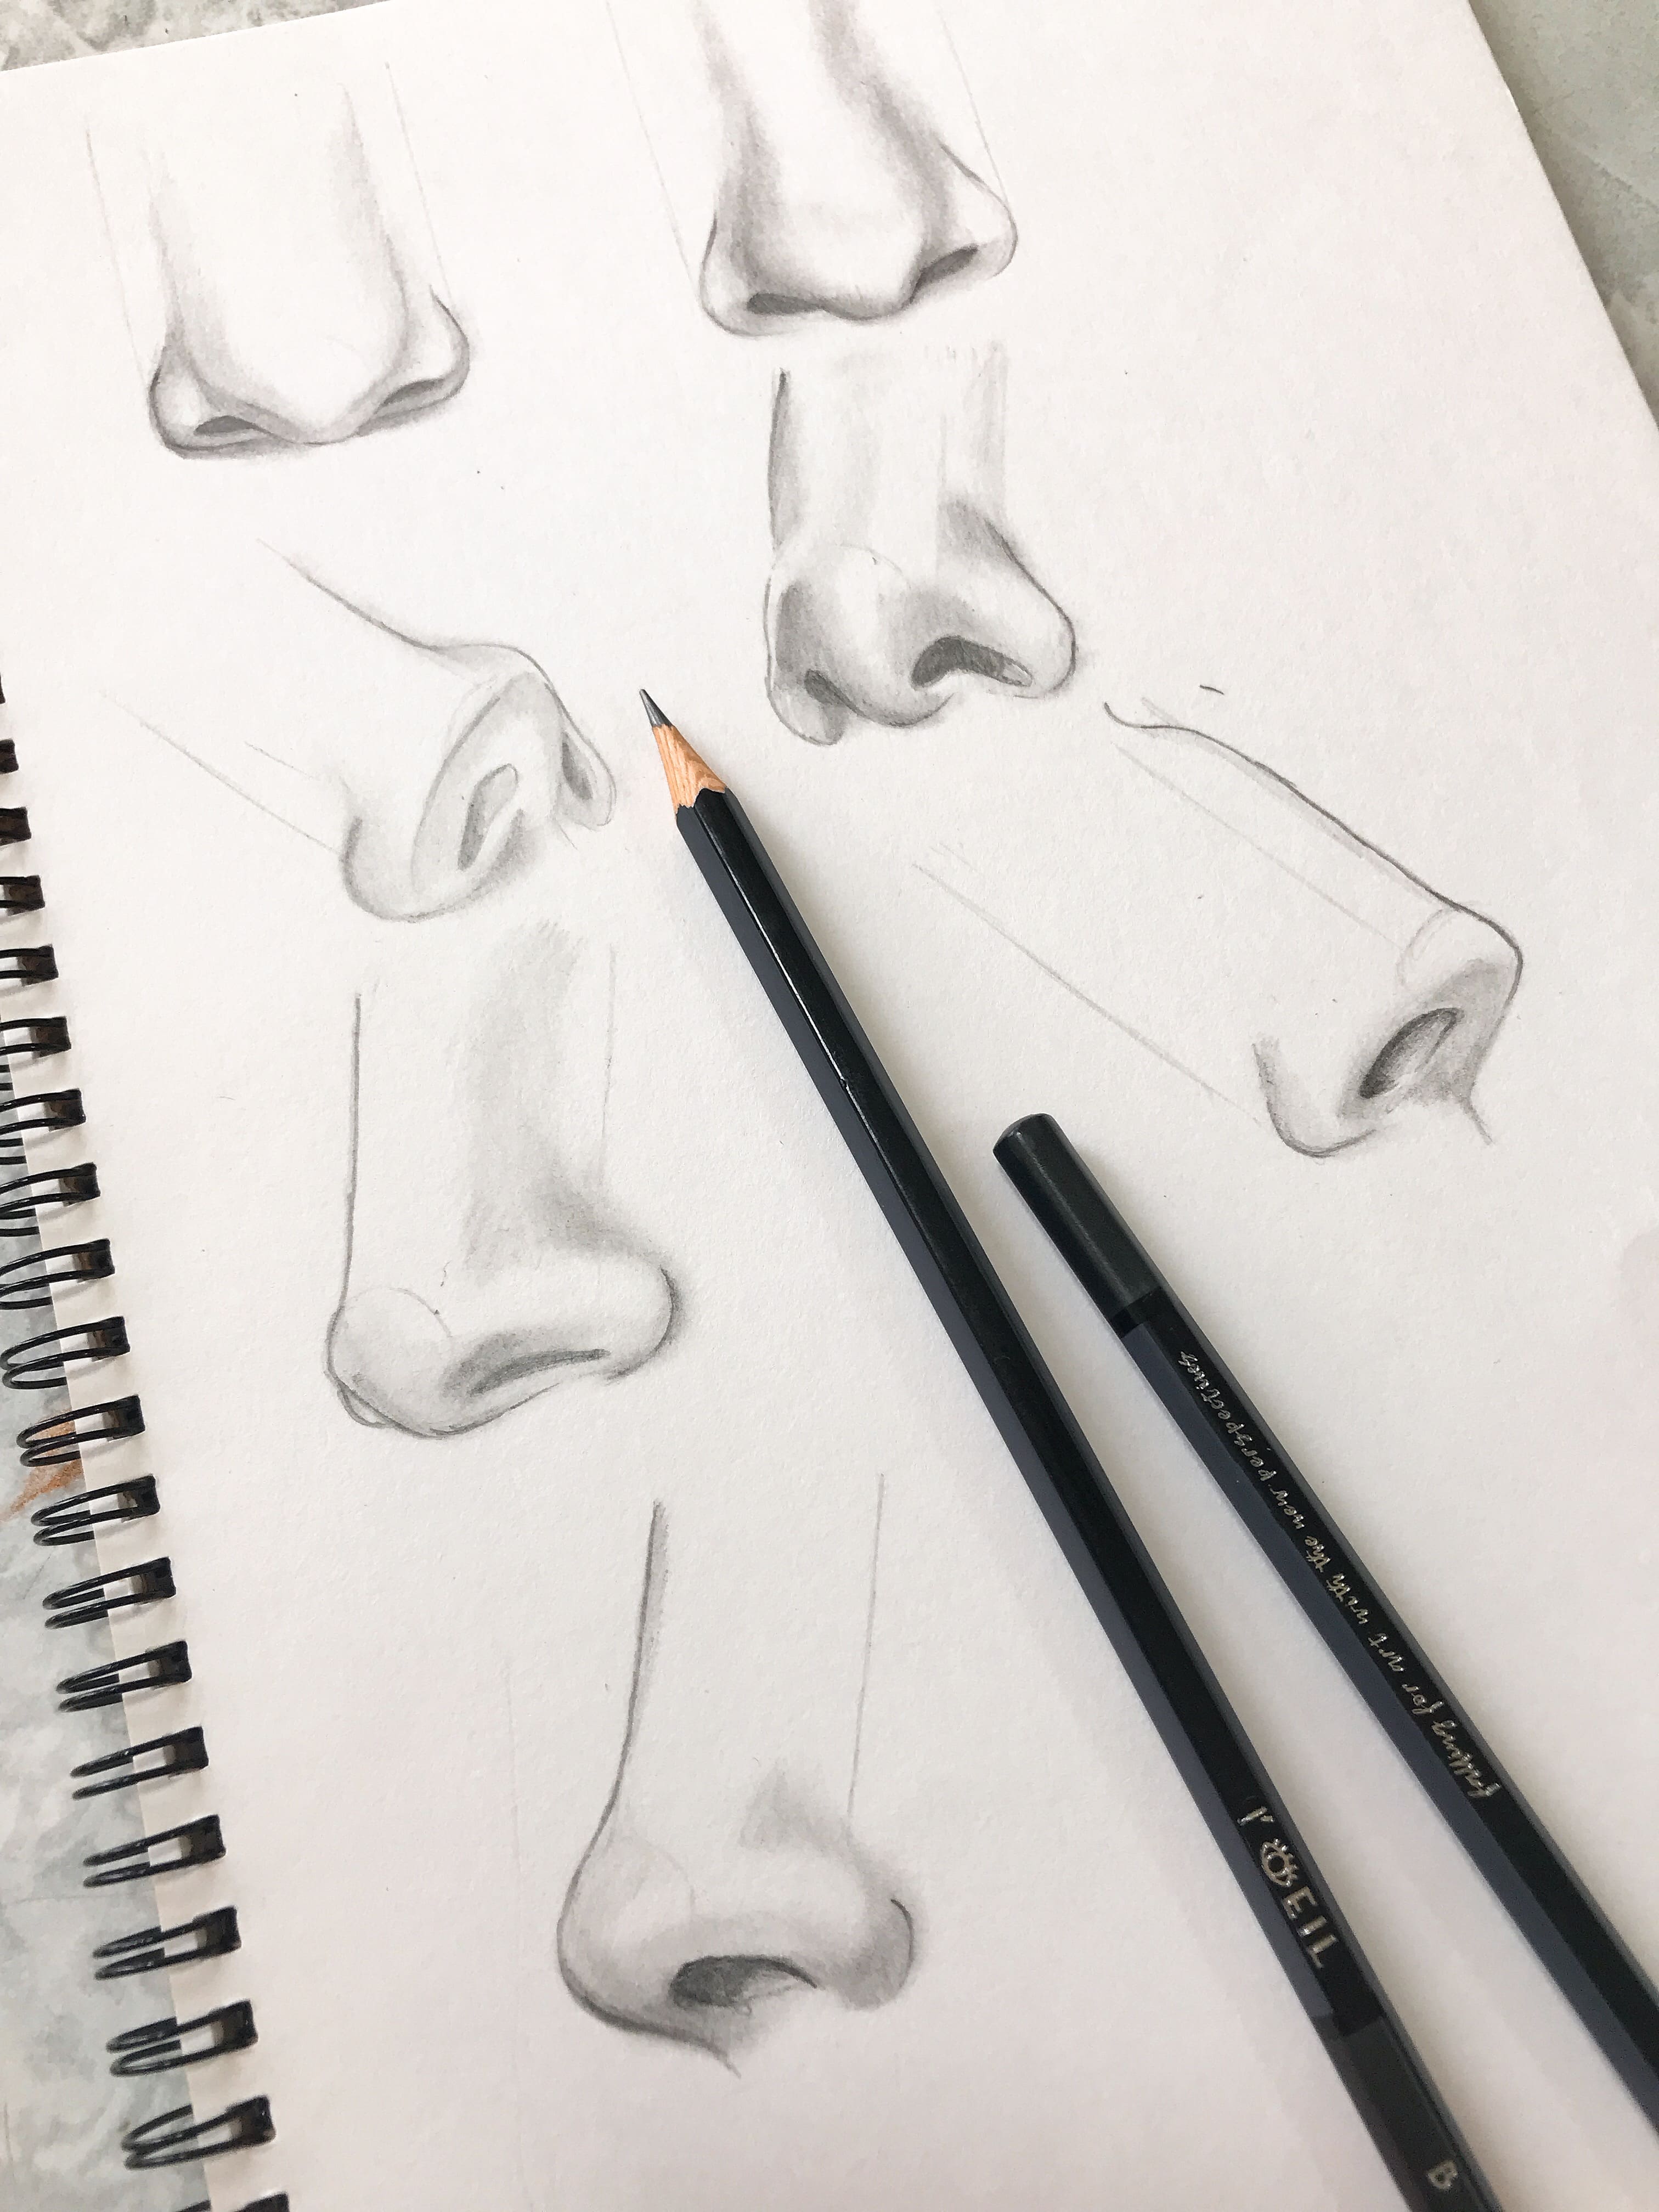 How to draw a Realistic Nose - YouTube